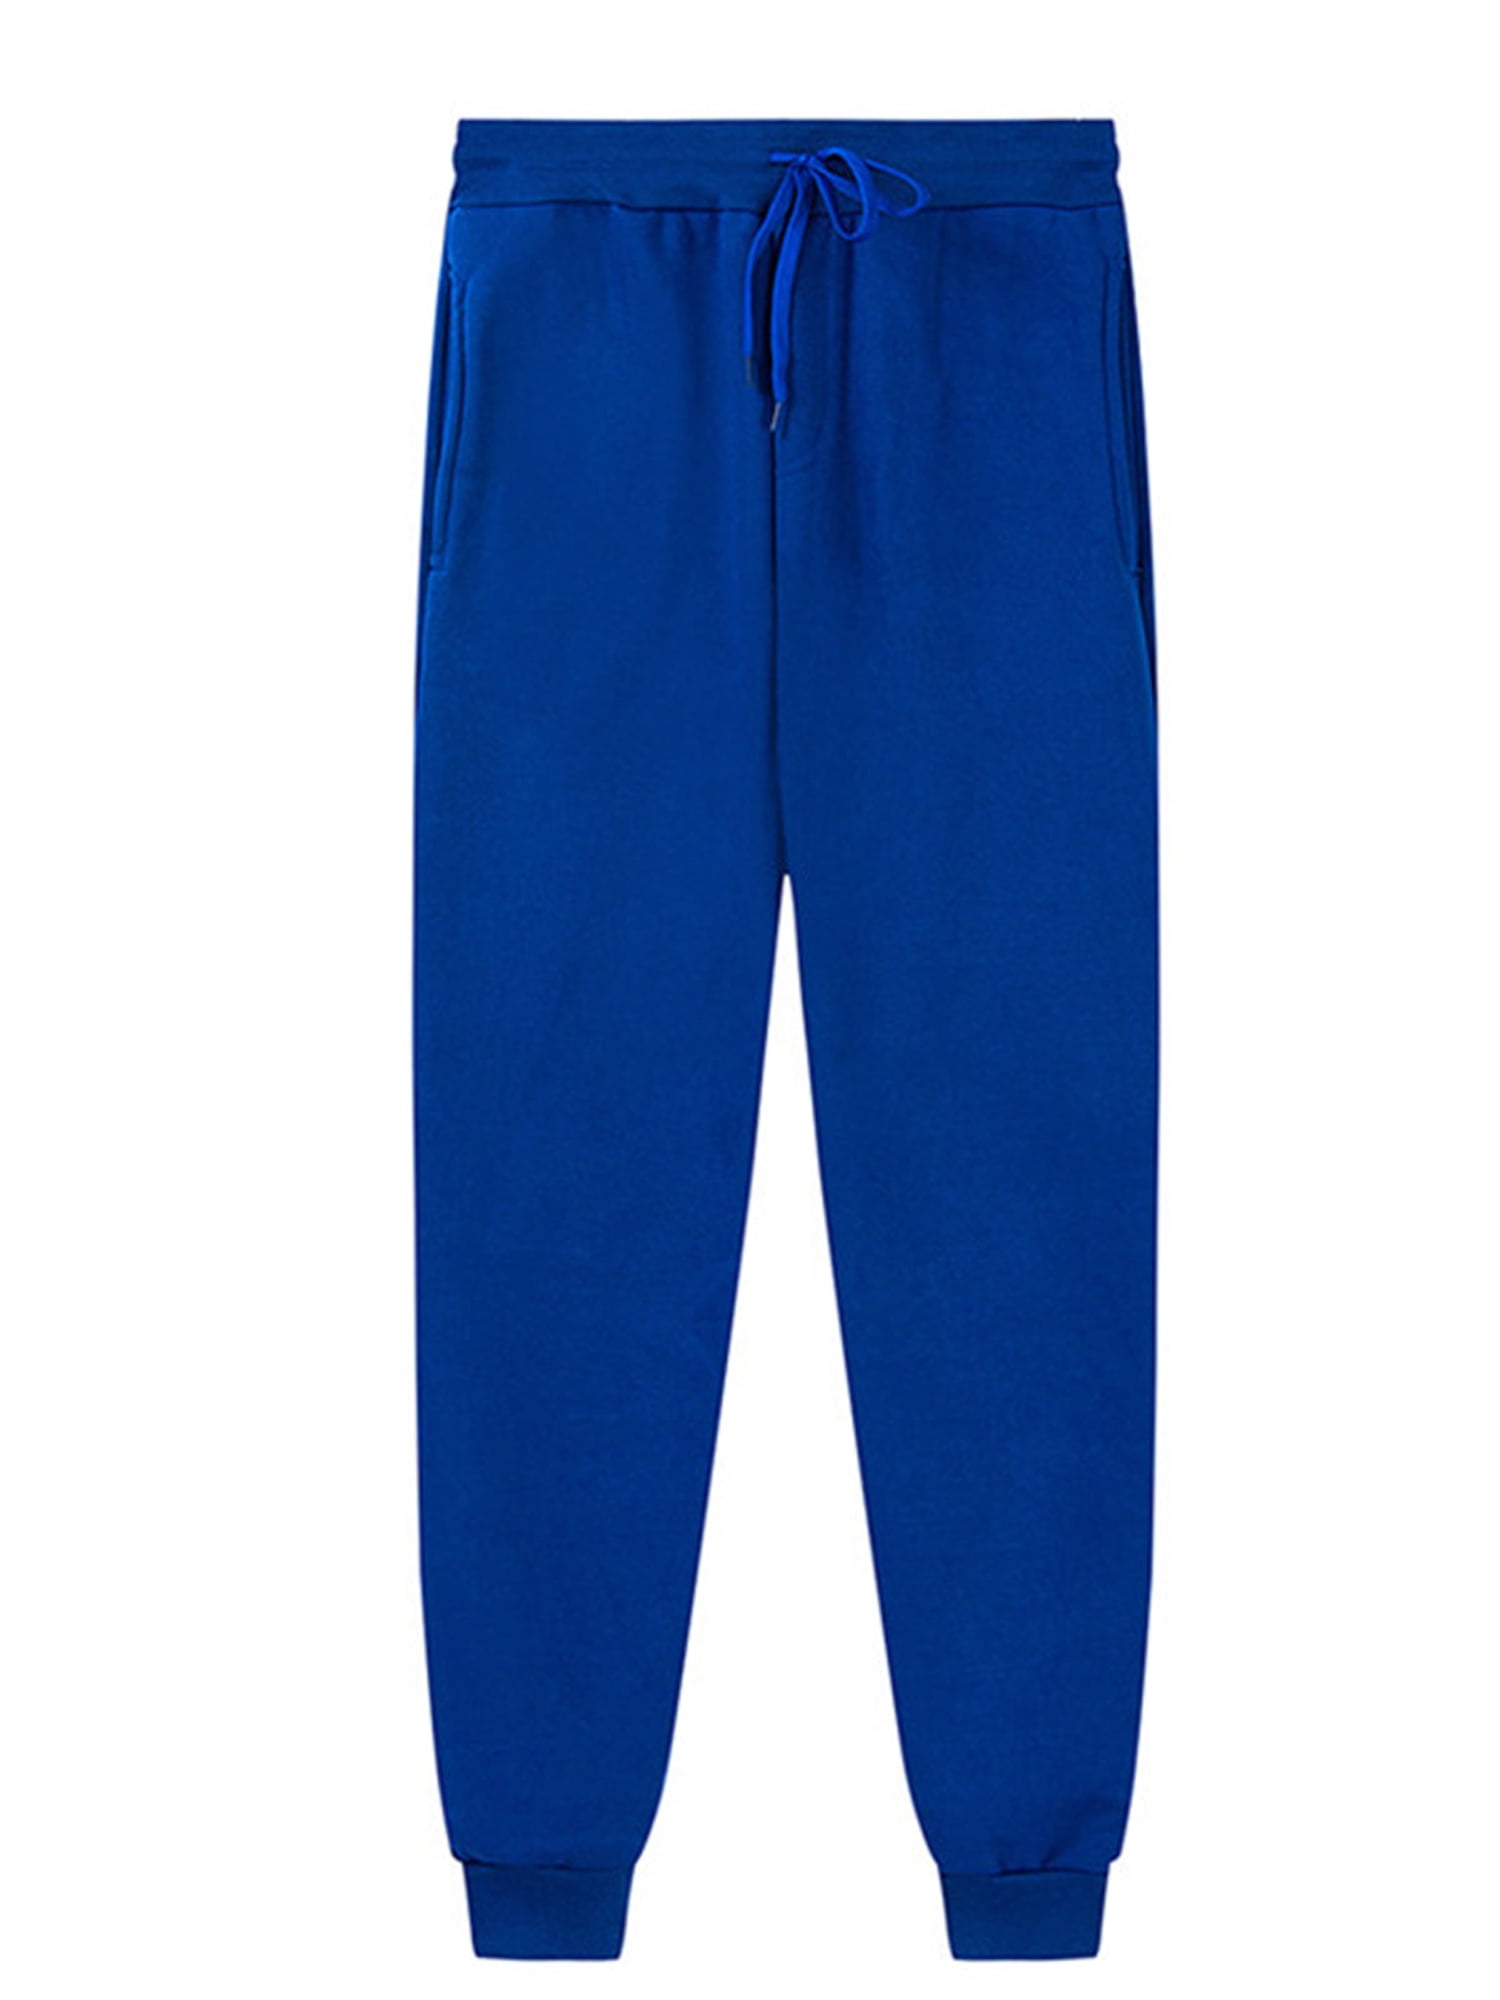 MEN FASHION Trousers Sports discount 82% Blue S Kipsta tracksuit and joggers 